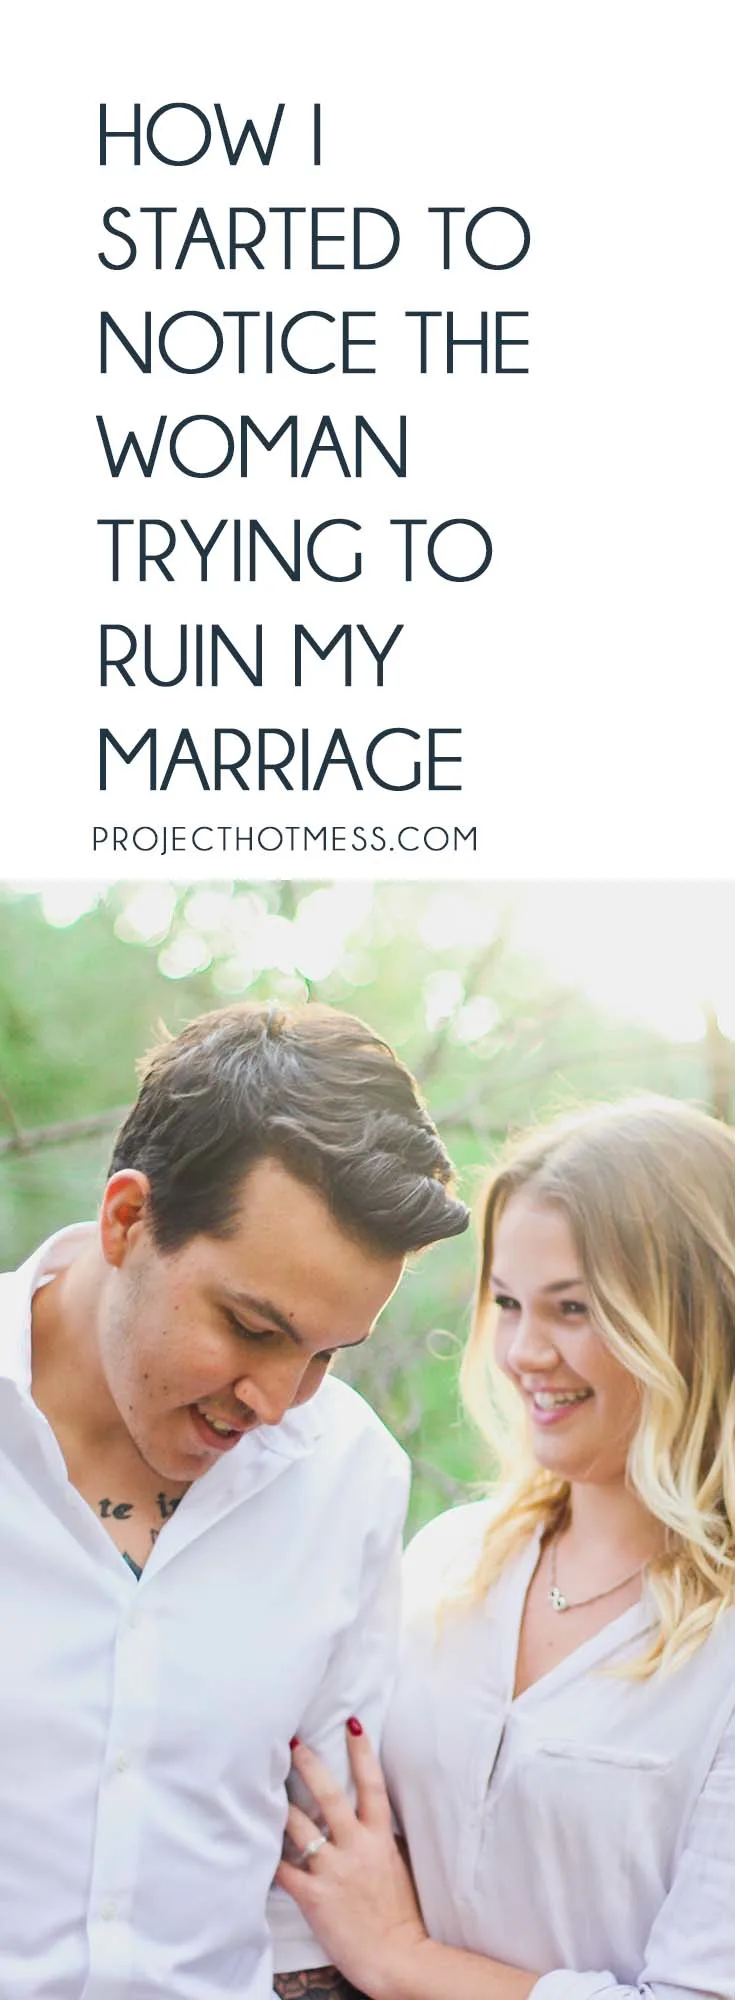 It all started innocently at first, and then I started to notice the woman trying to ruin my marriage. Stand up for your marriage and trust your husband. #marriageadvice #marriageproblems #relationshipadvice #marriagetips